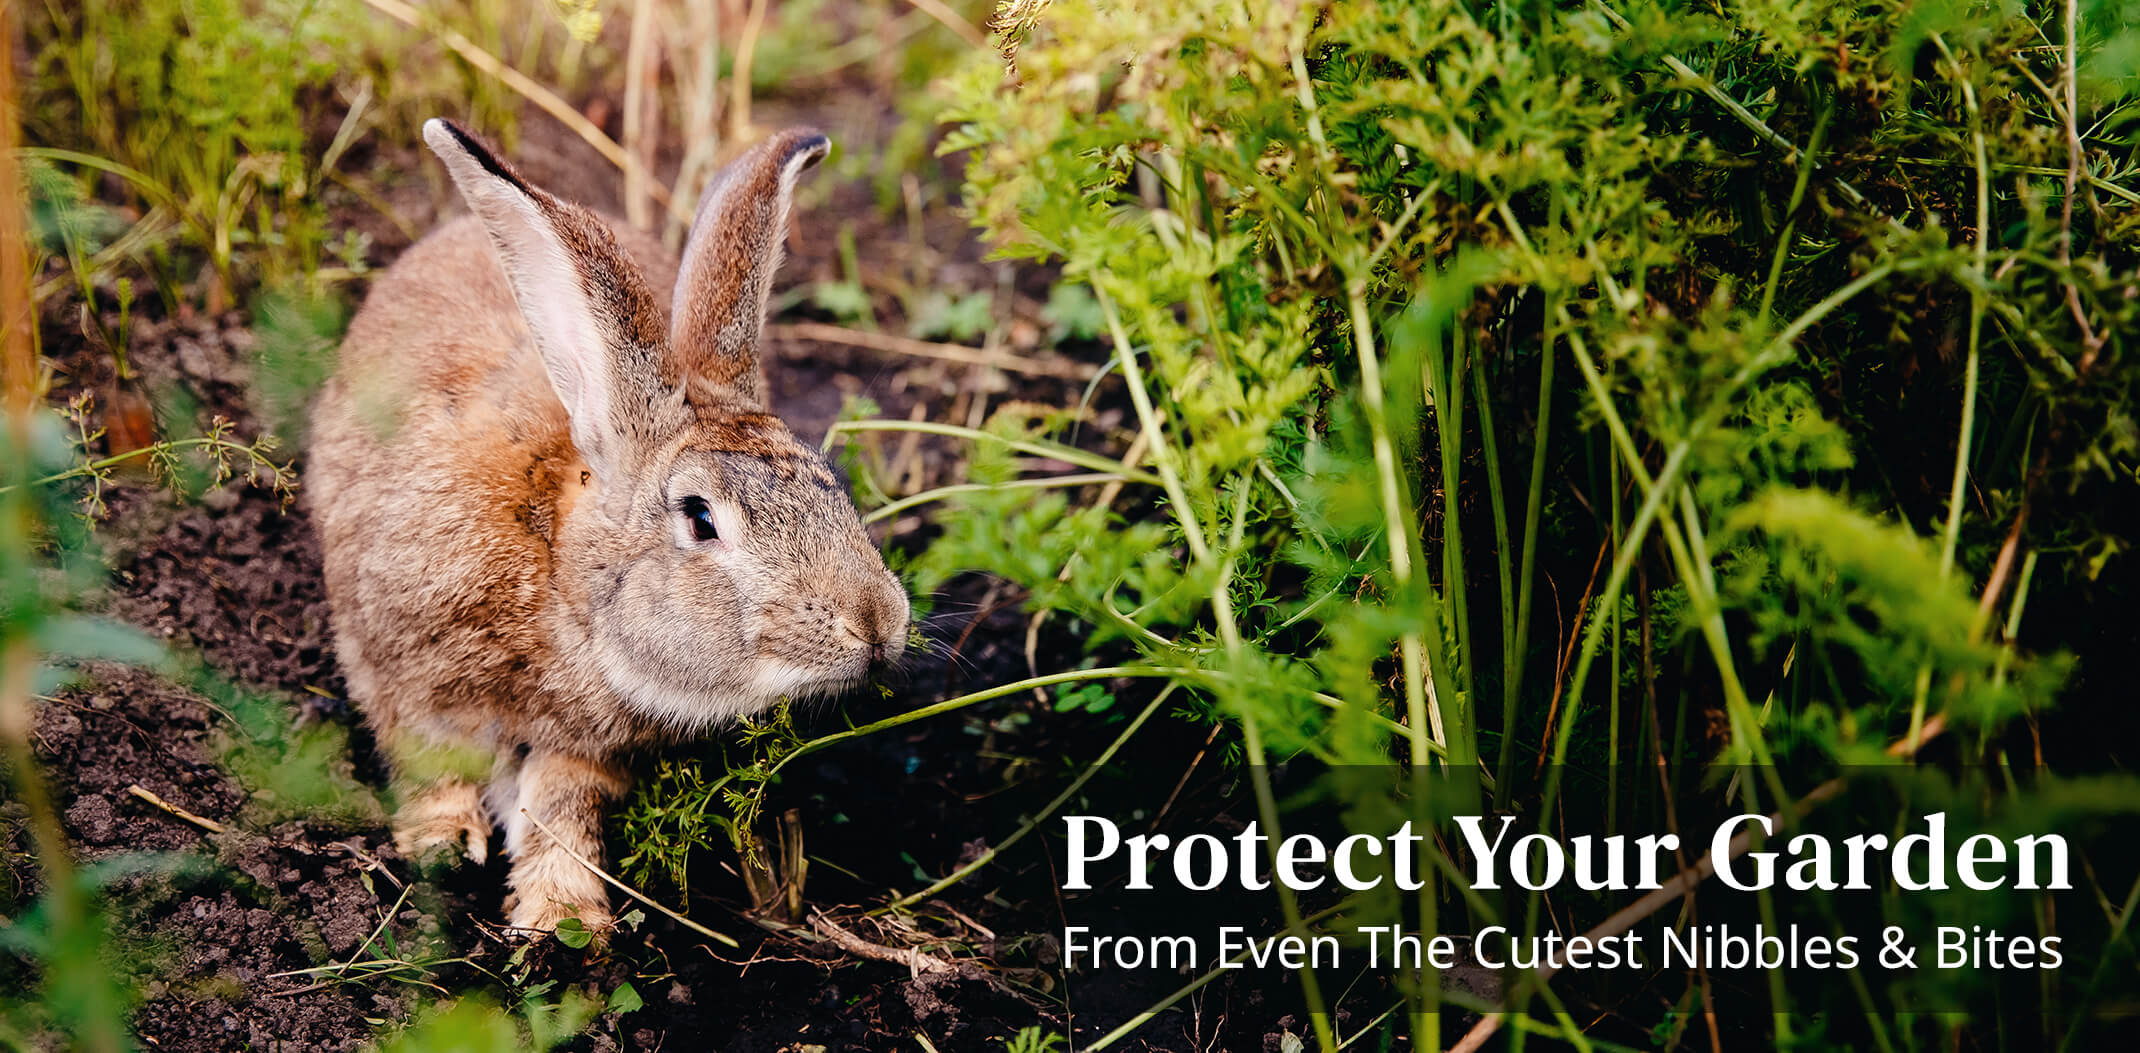 10 Easy Ways To Protect Your Garden From Animals & Pests